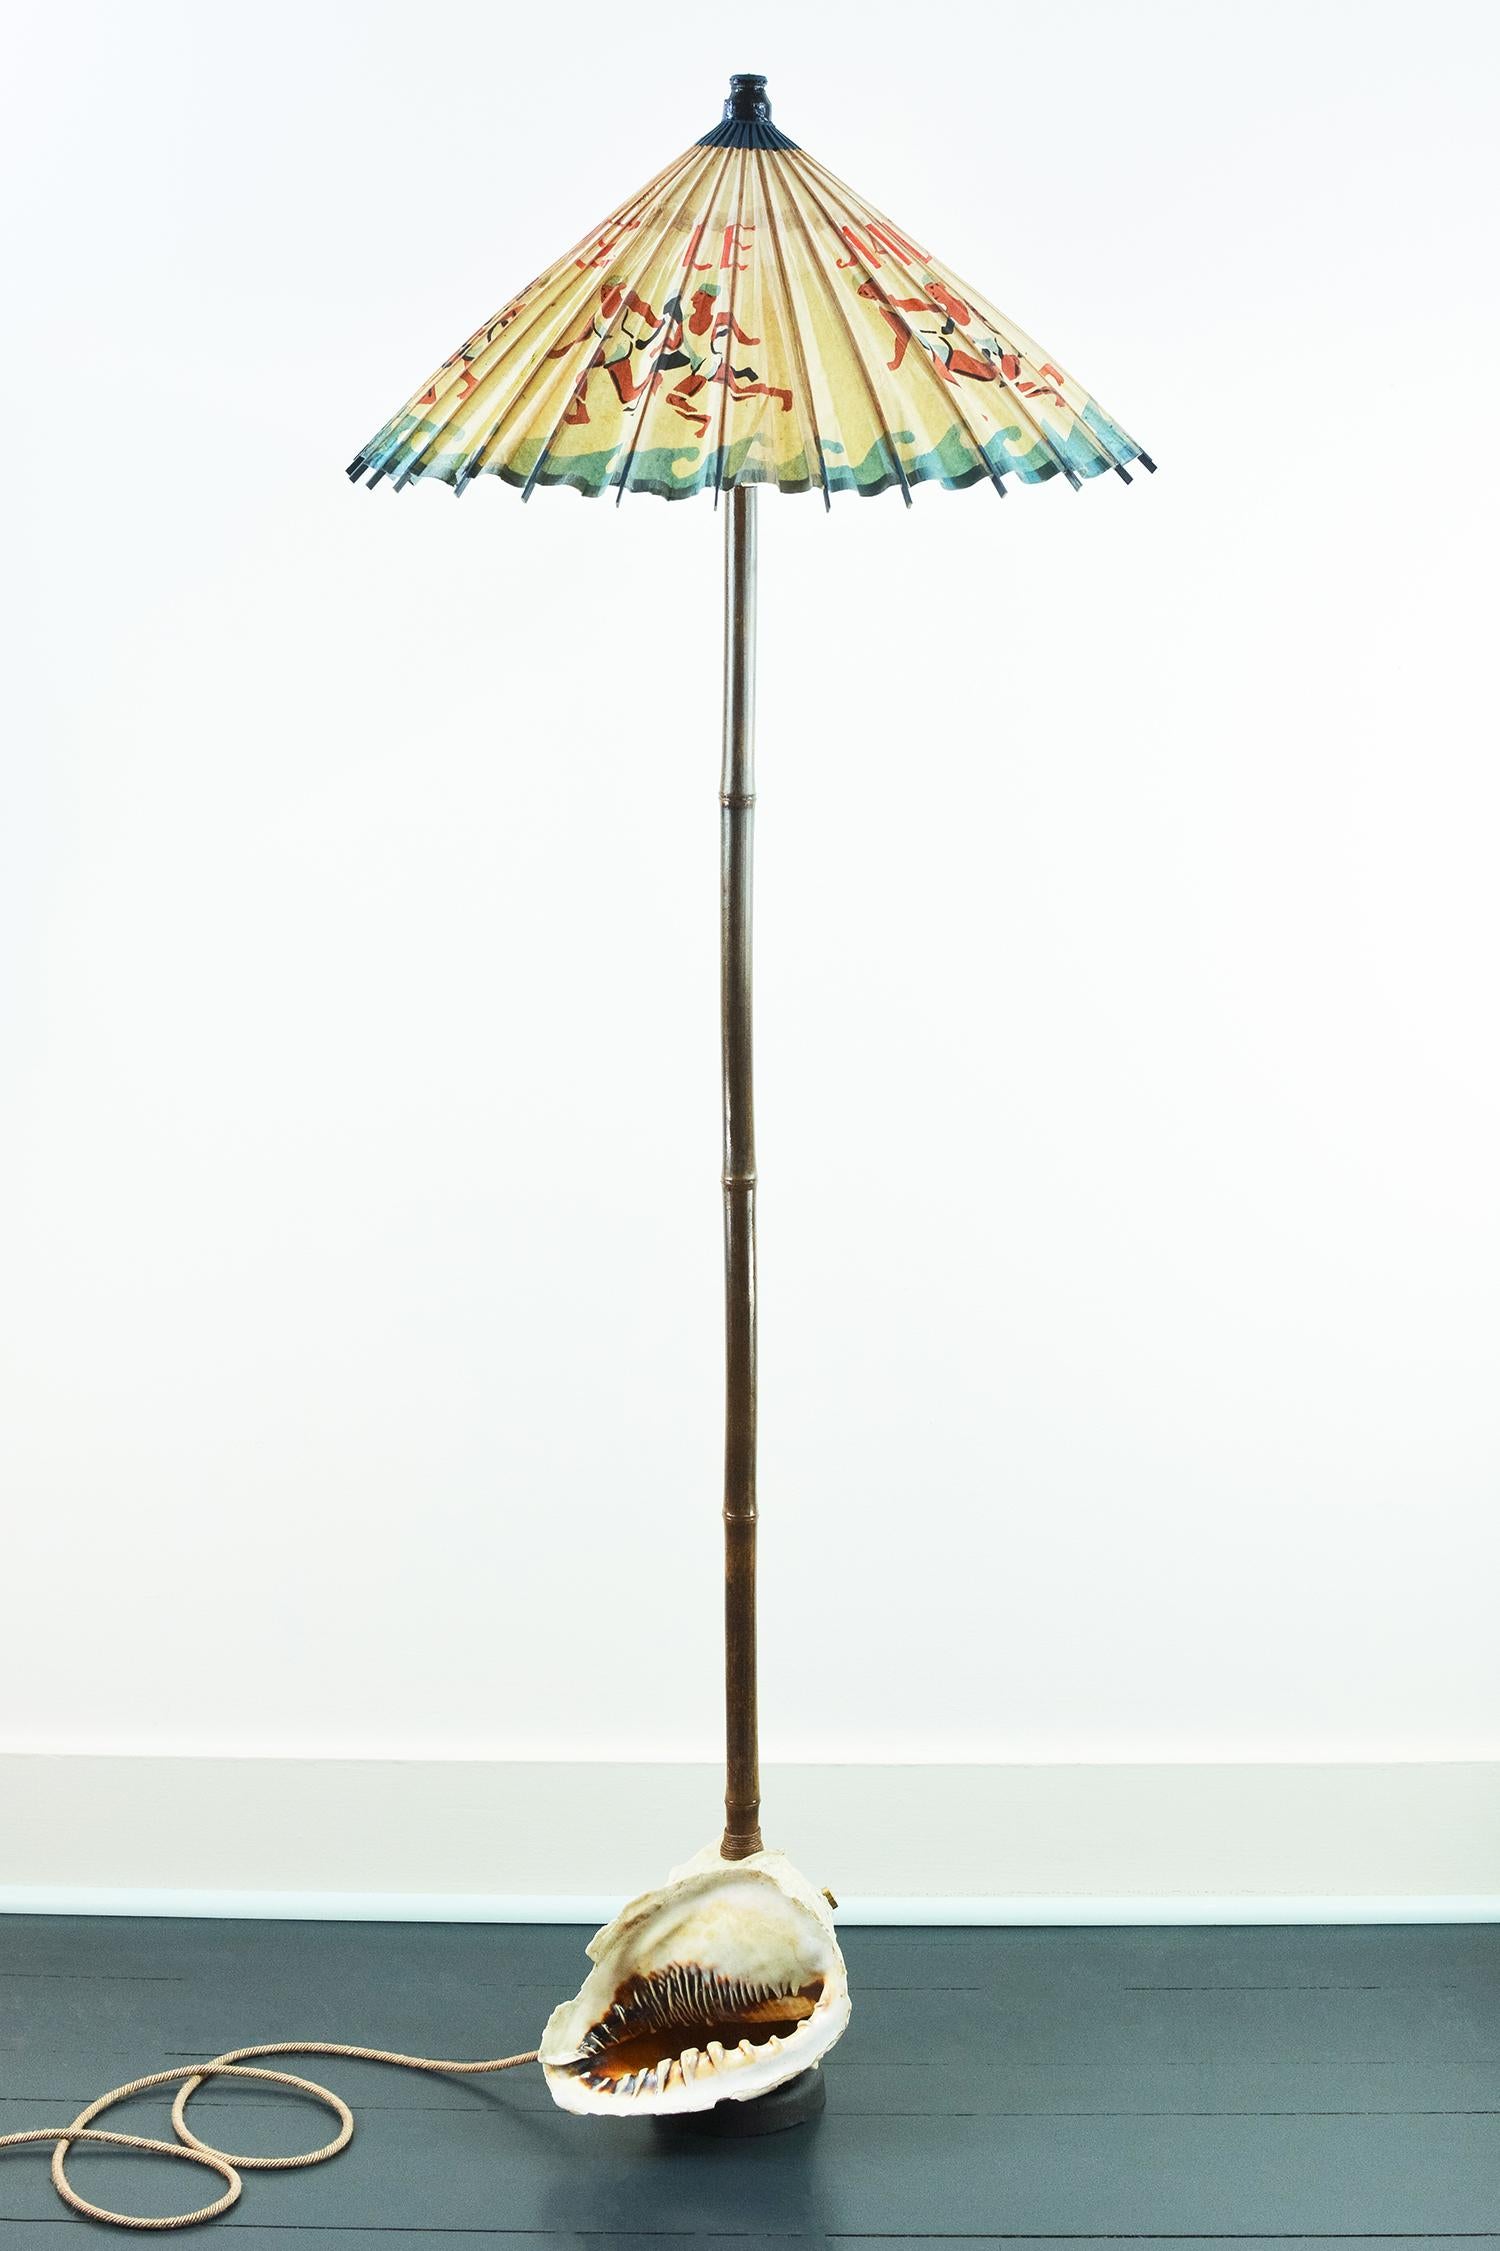 Model No. 014 is a one-of-a-kind art lamp featuring a vintage rice-paper shade constructed from an exceedingly rare 1919 French parasol advertising a line of cold-water bathing suits.

The shade sits atop a lacquered, mahogany brown black bamboo